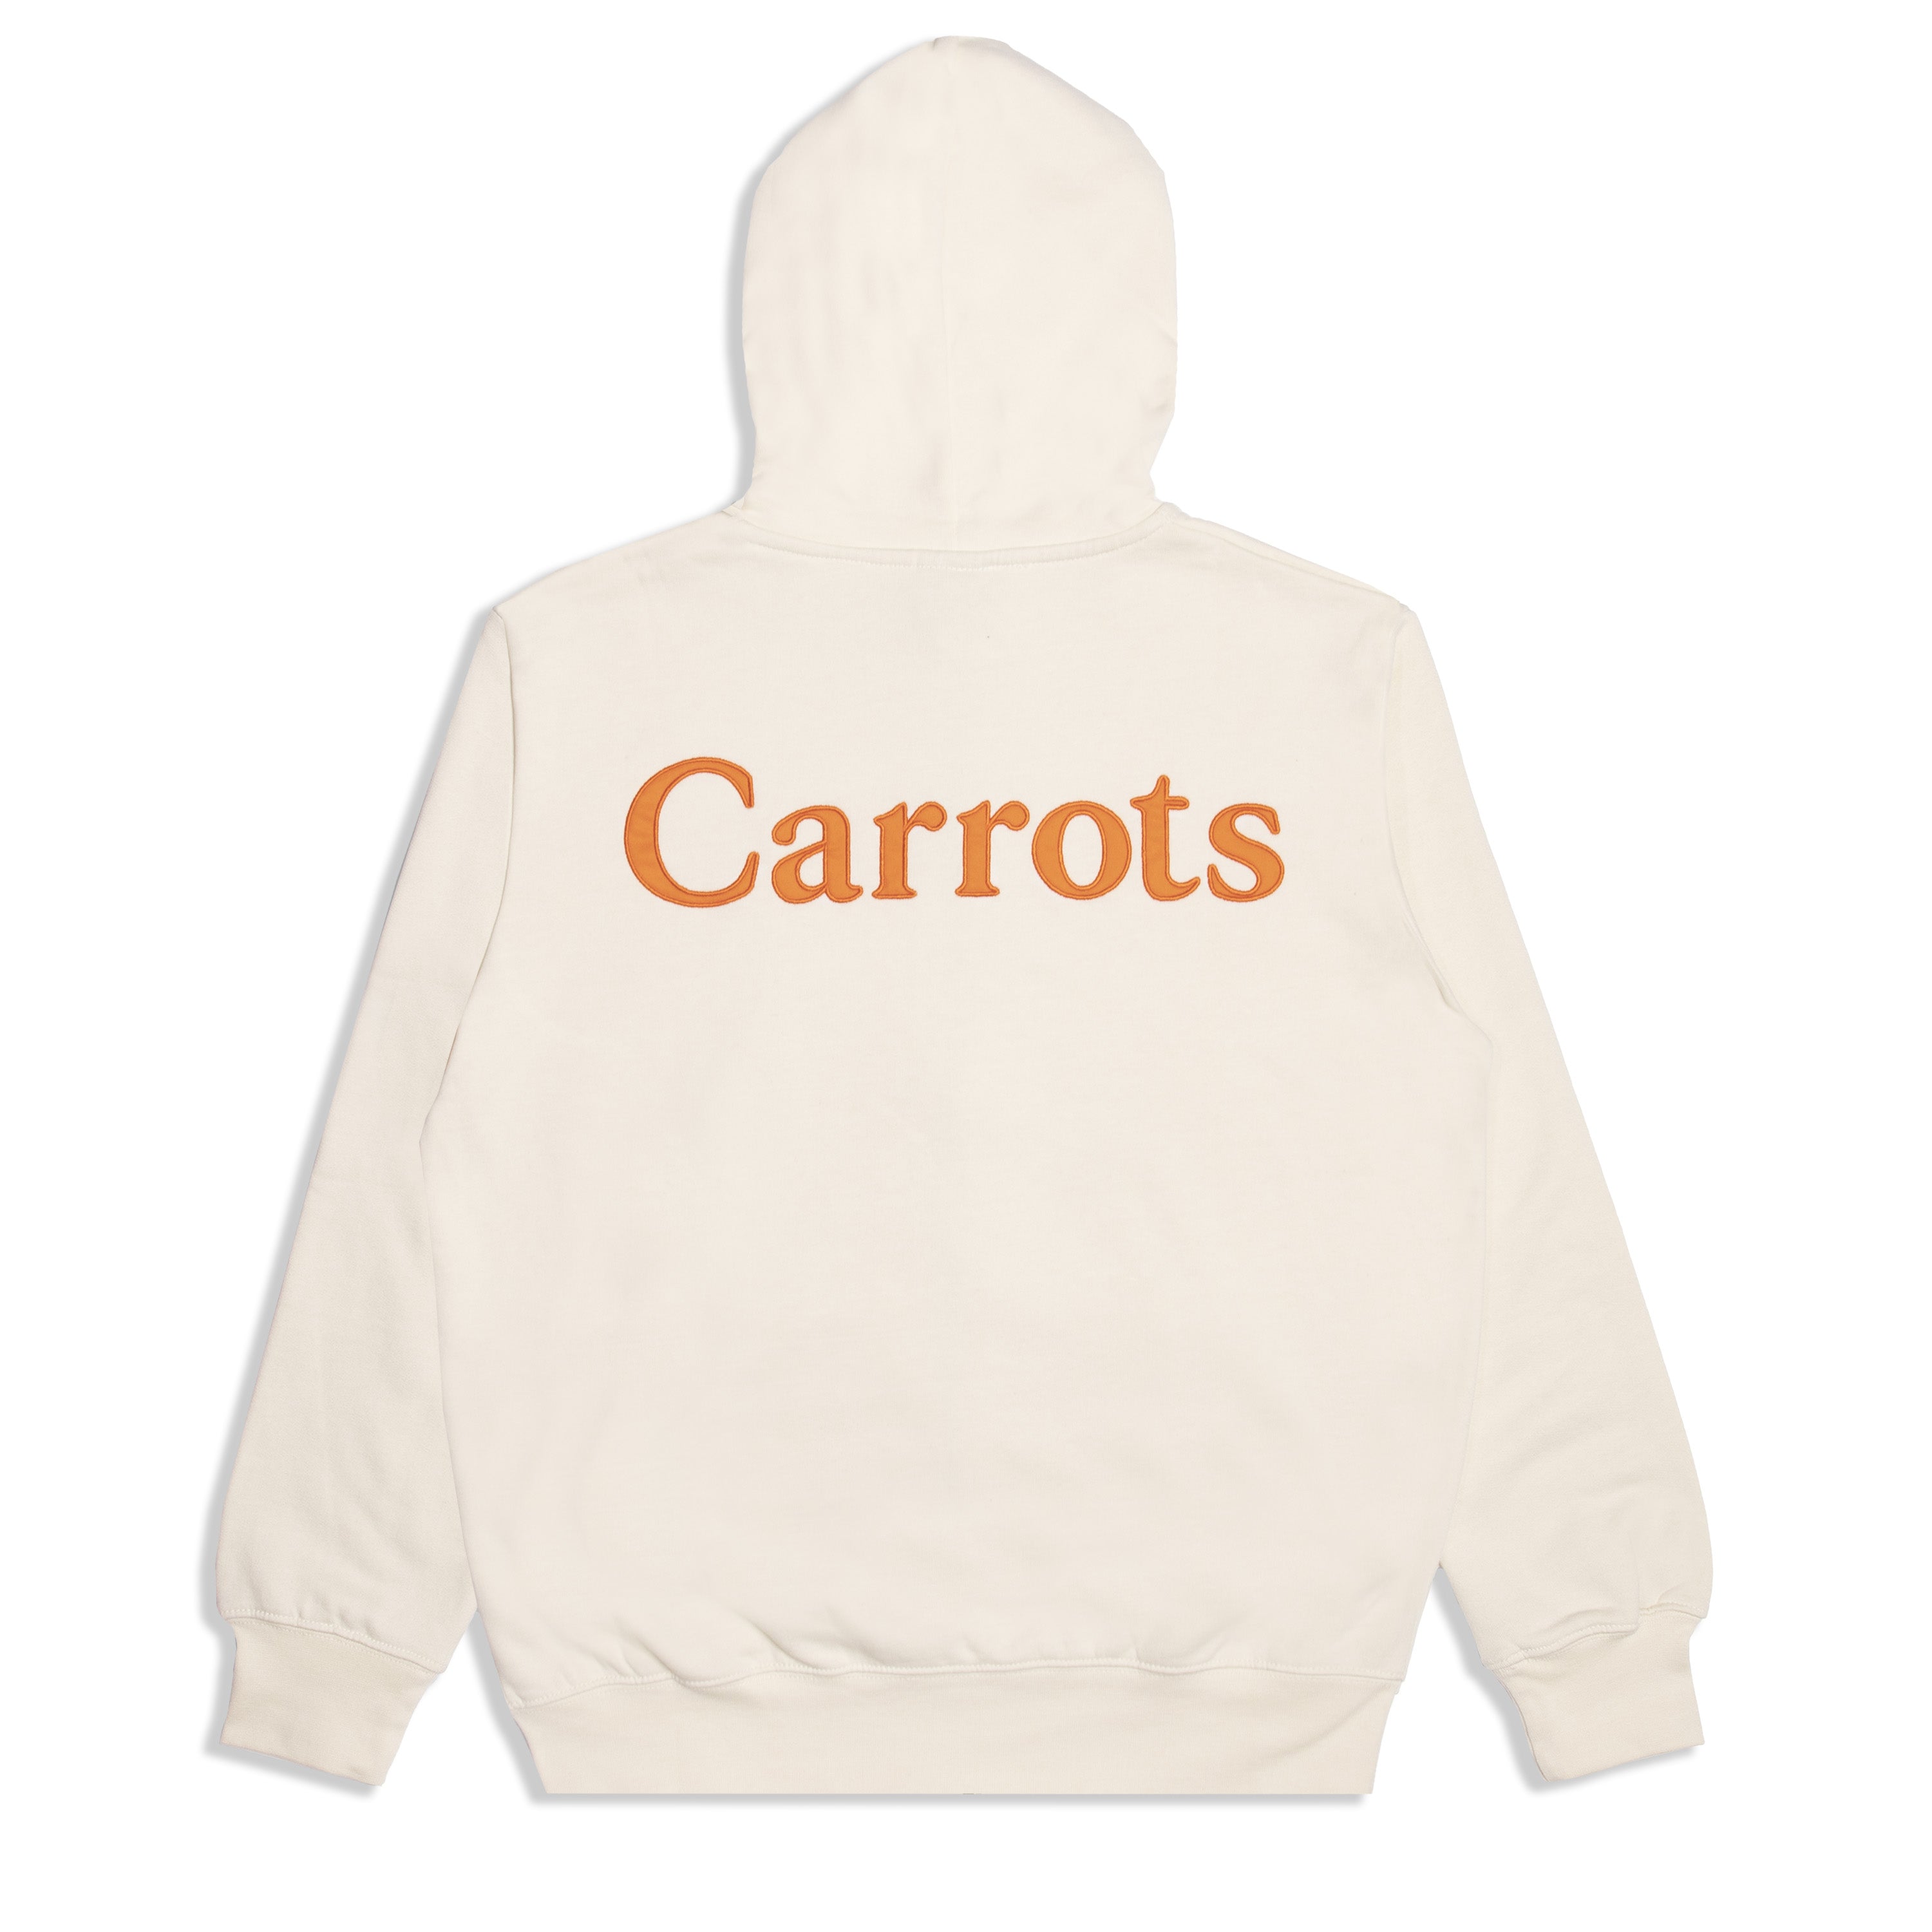 CARROTS FW22 | Collection | Carrots by Anwar Carrots – Carrots By